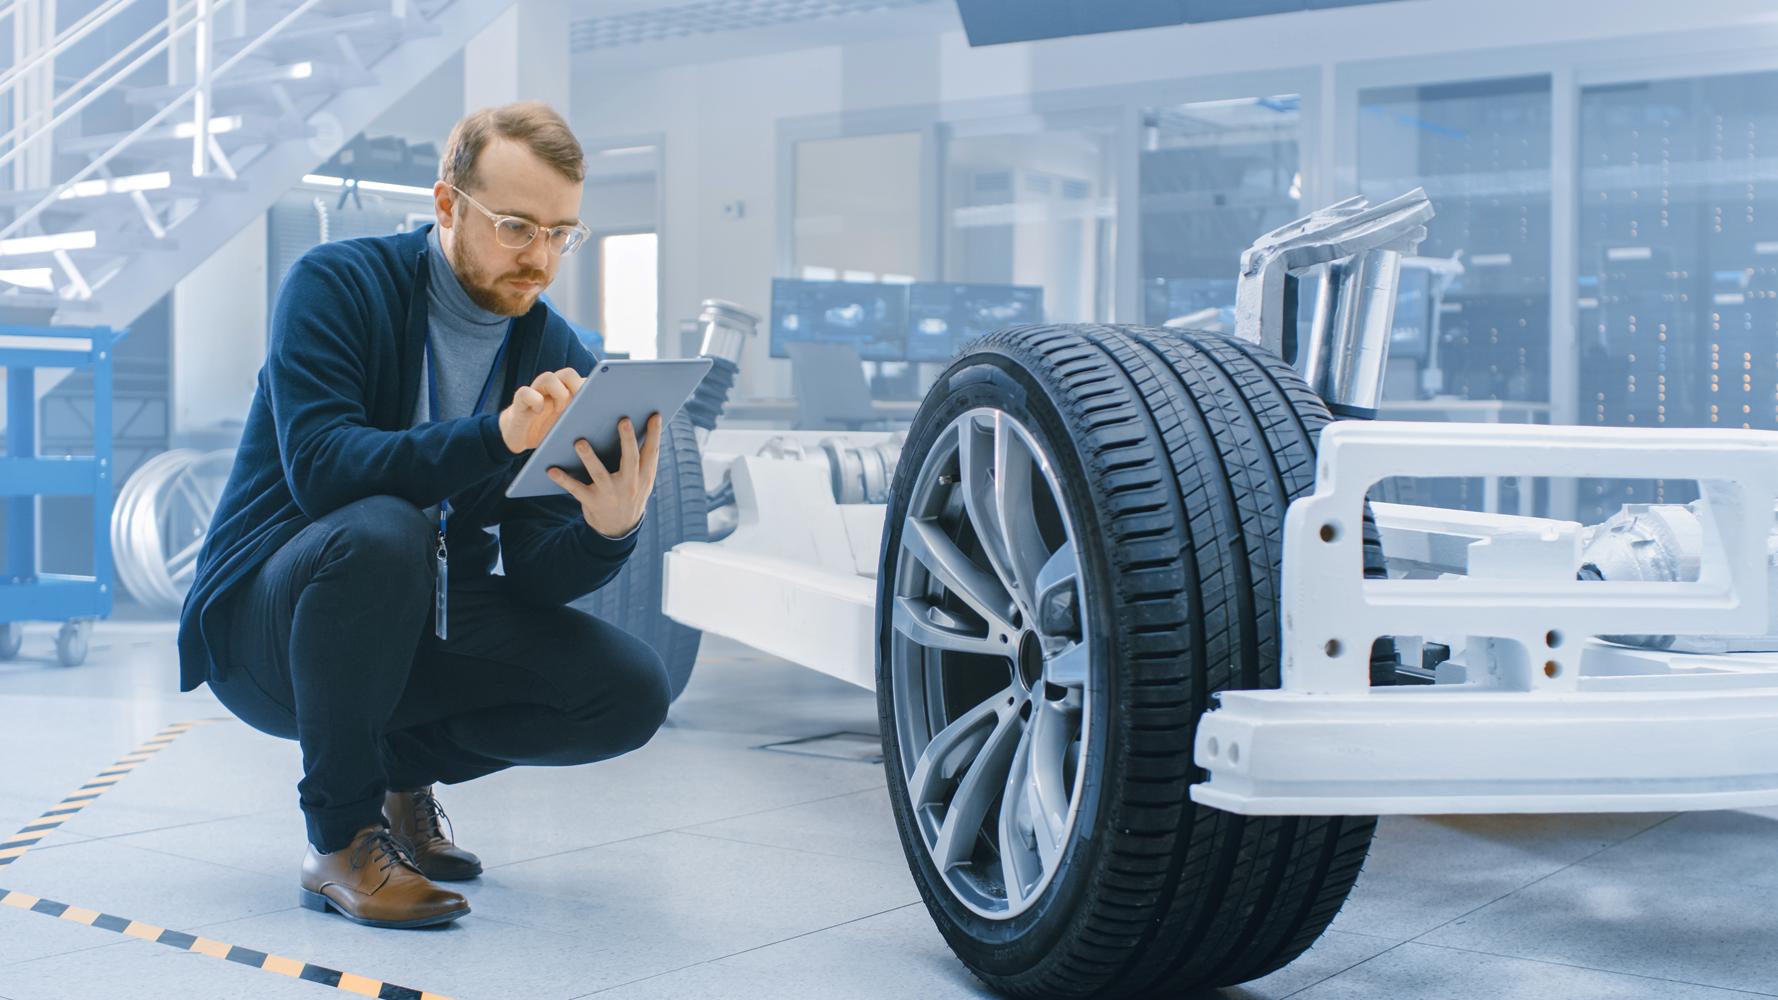 An engineer checking the chassis settings in the futuristic laboratory